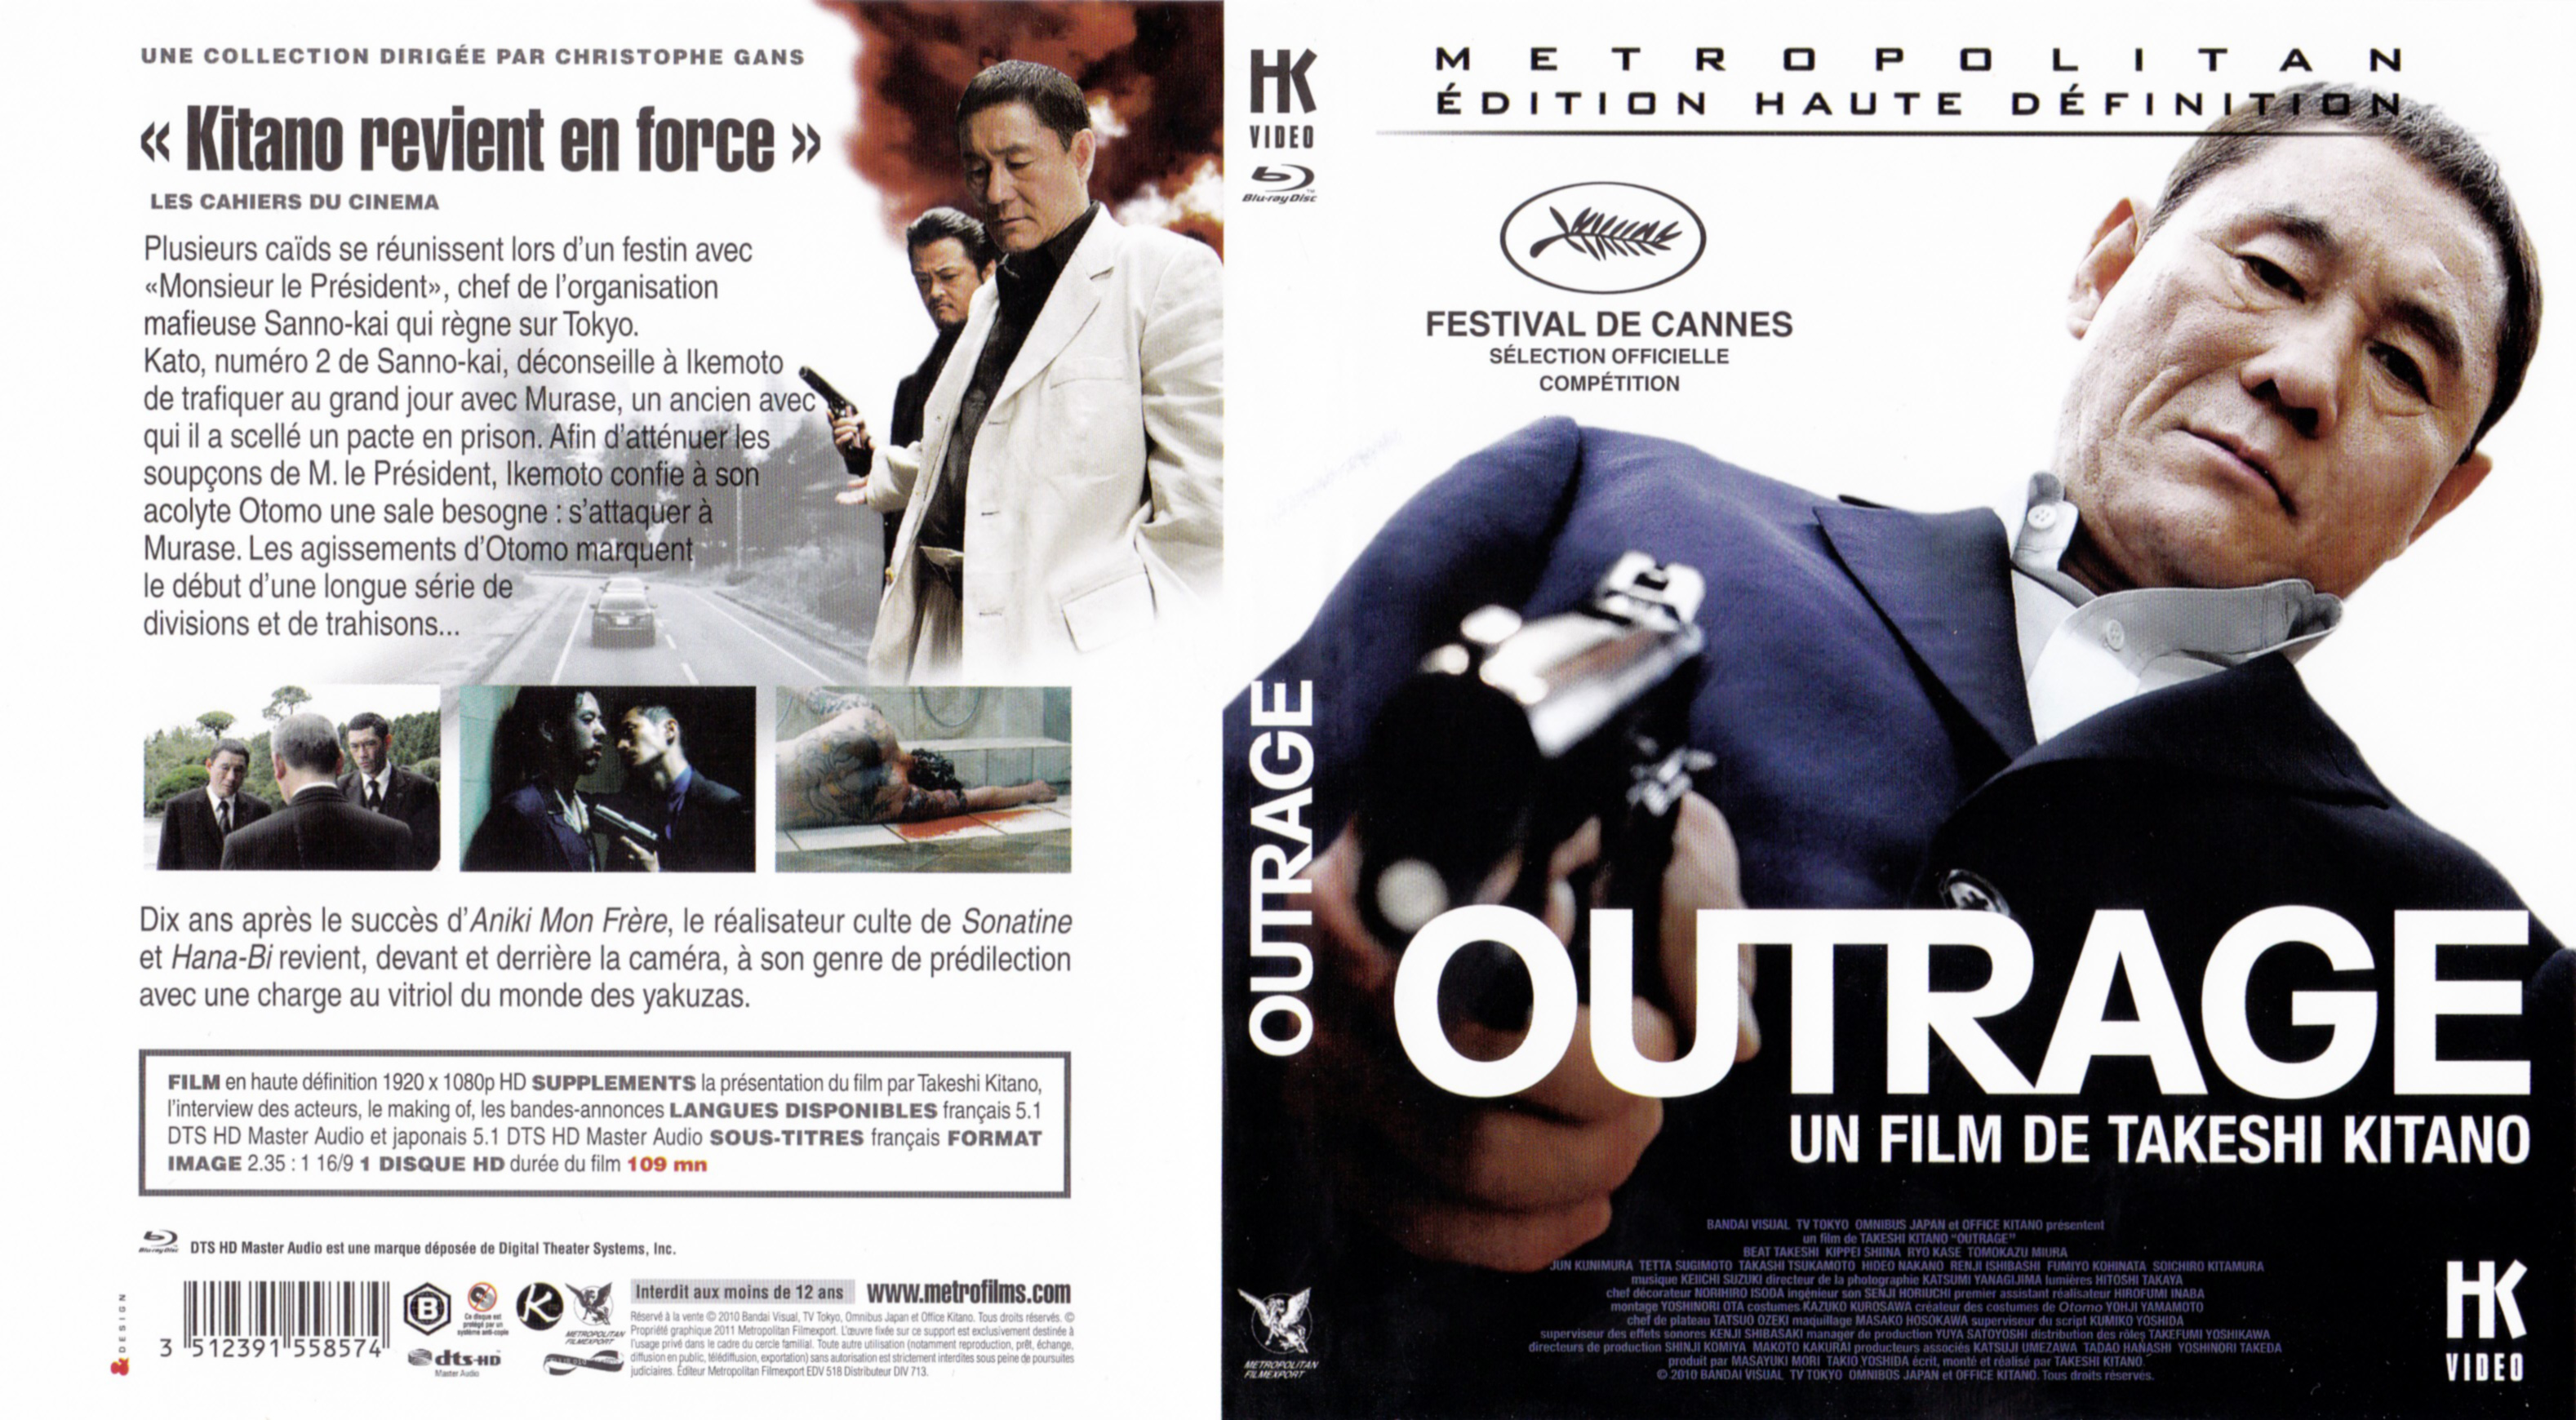 Jaquette DVD Outrage (BLU-RAY)